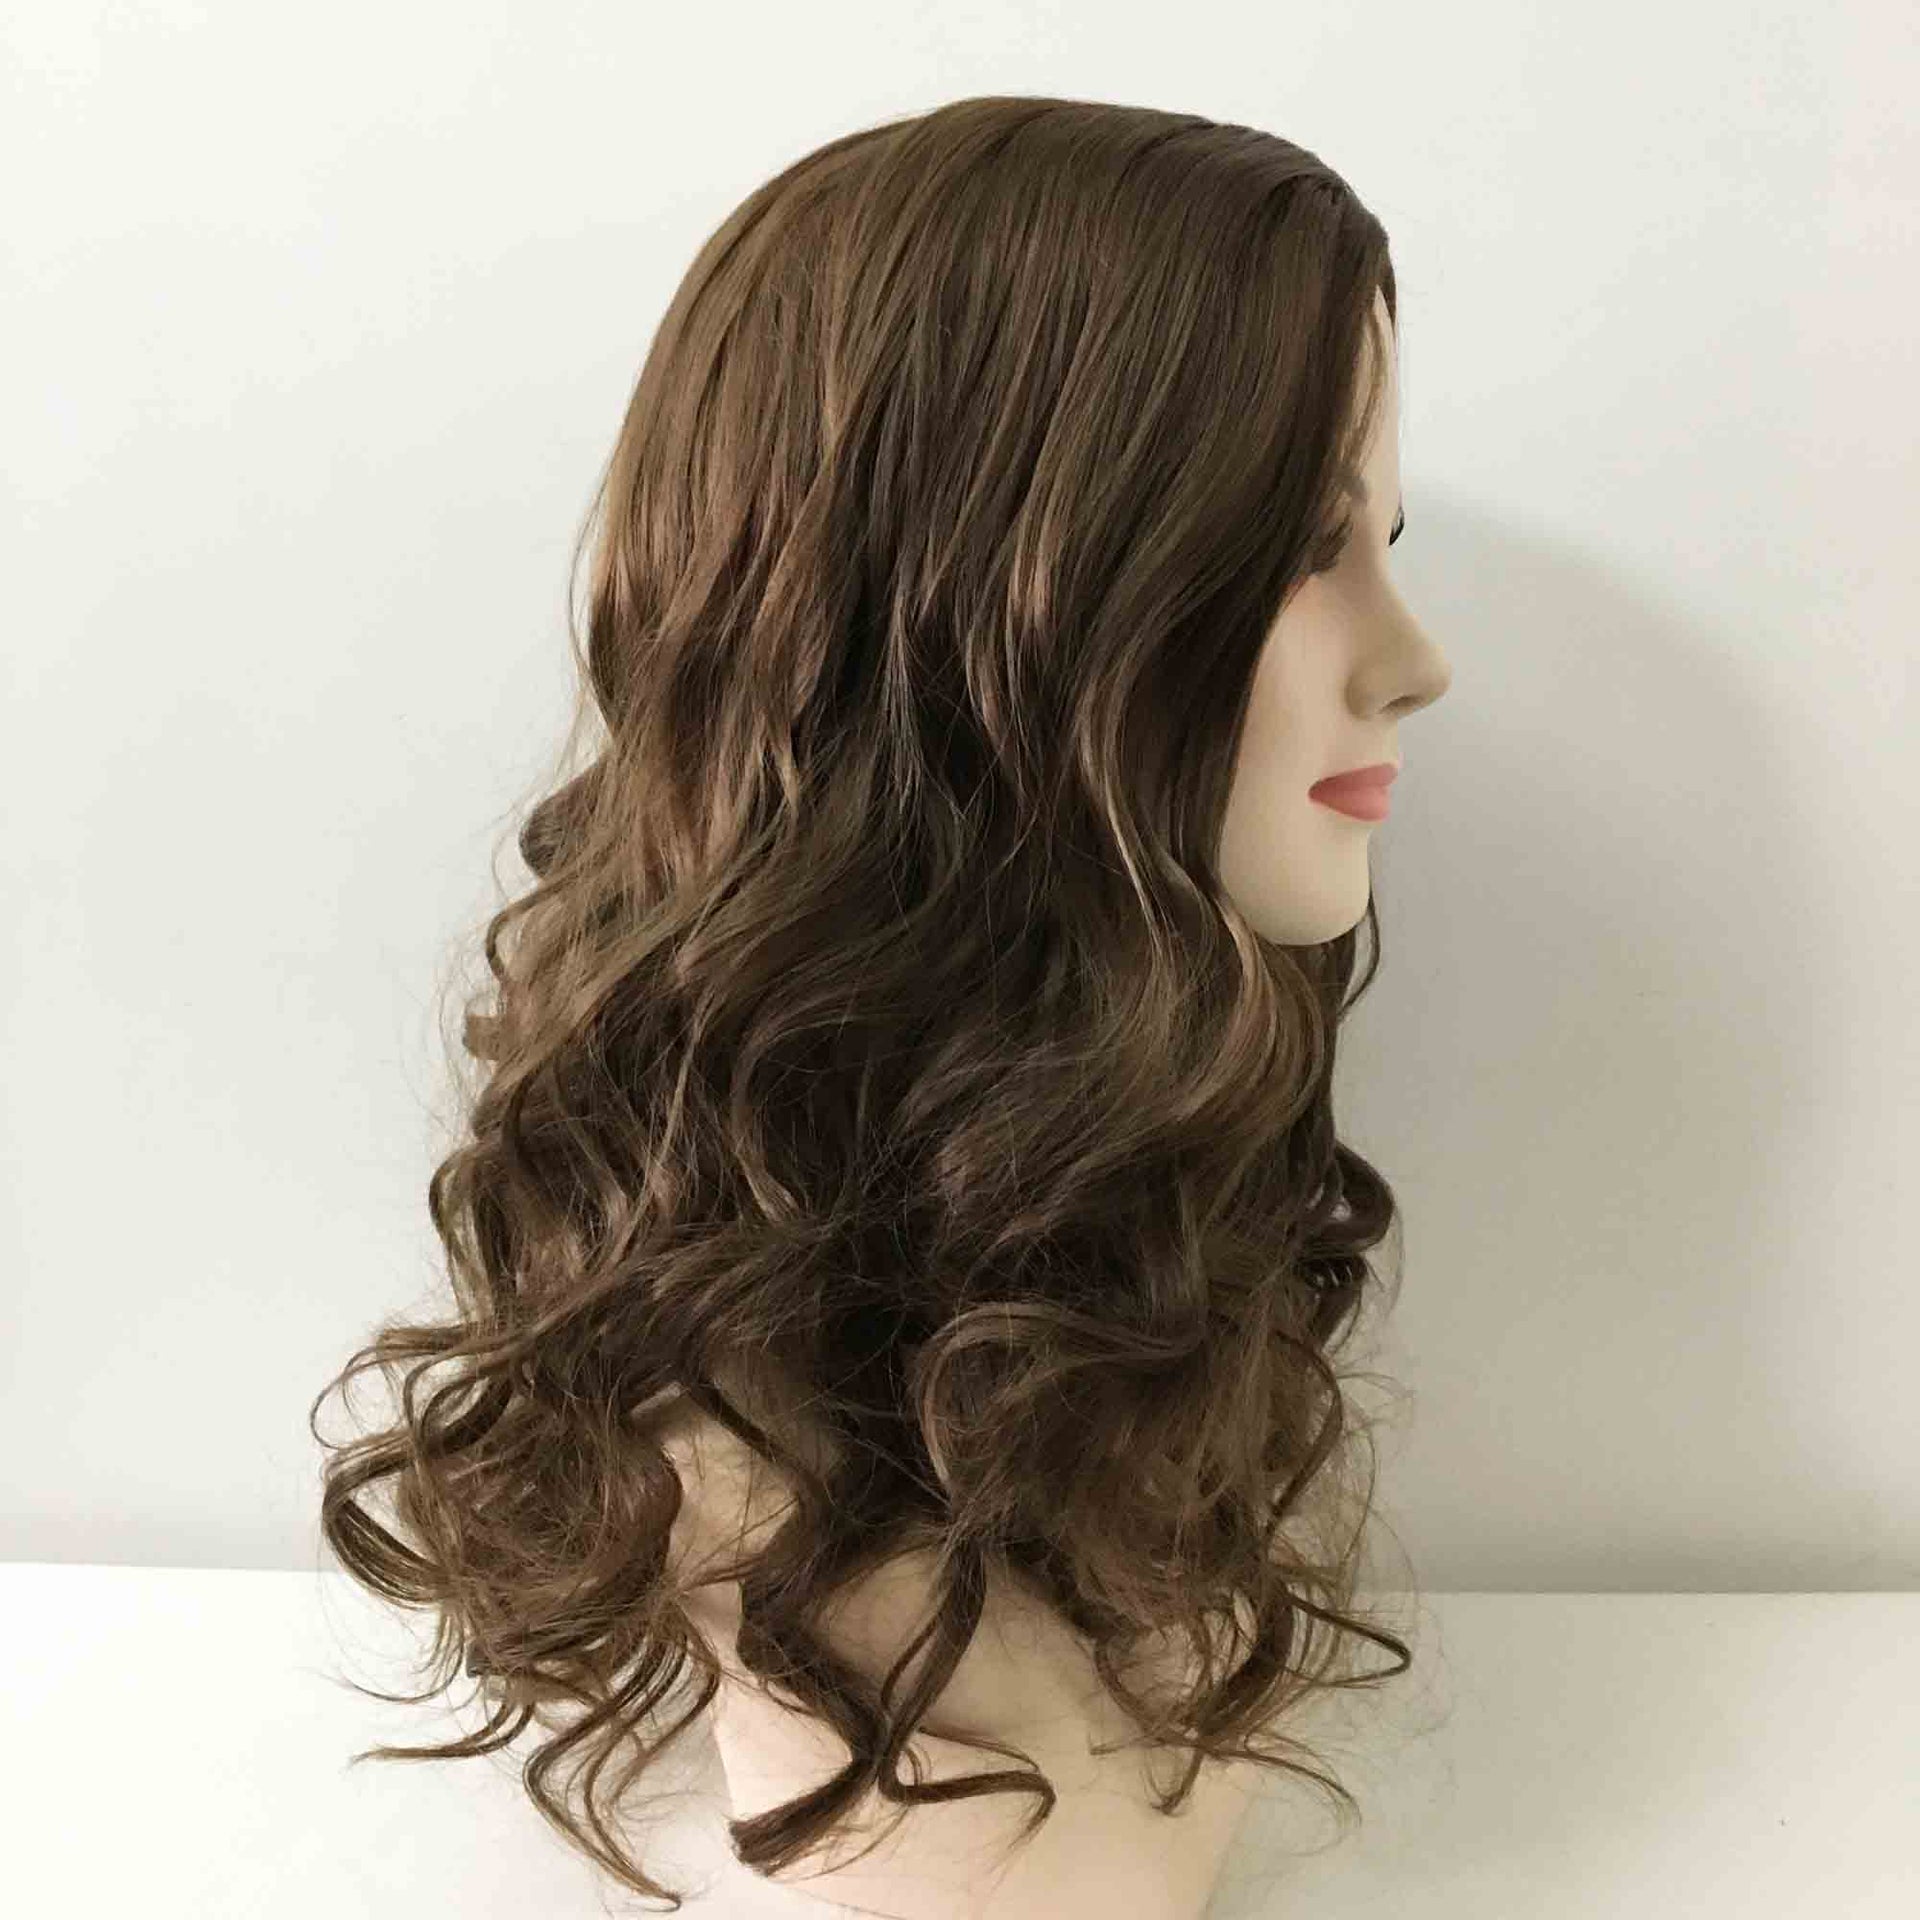 nevermindyrhead Women Chocolate Dark Brown Long Curly Wavy Fluffy Side Part Synthetic Wig